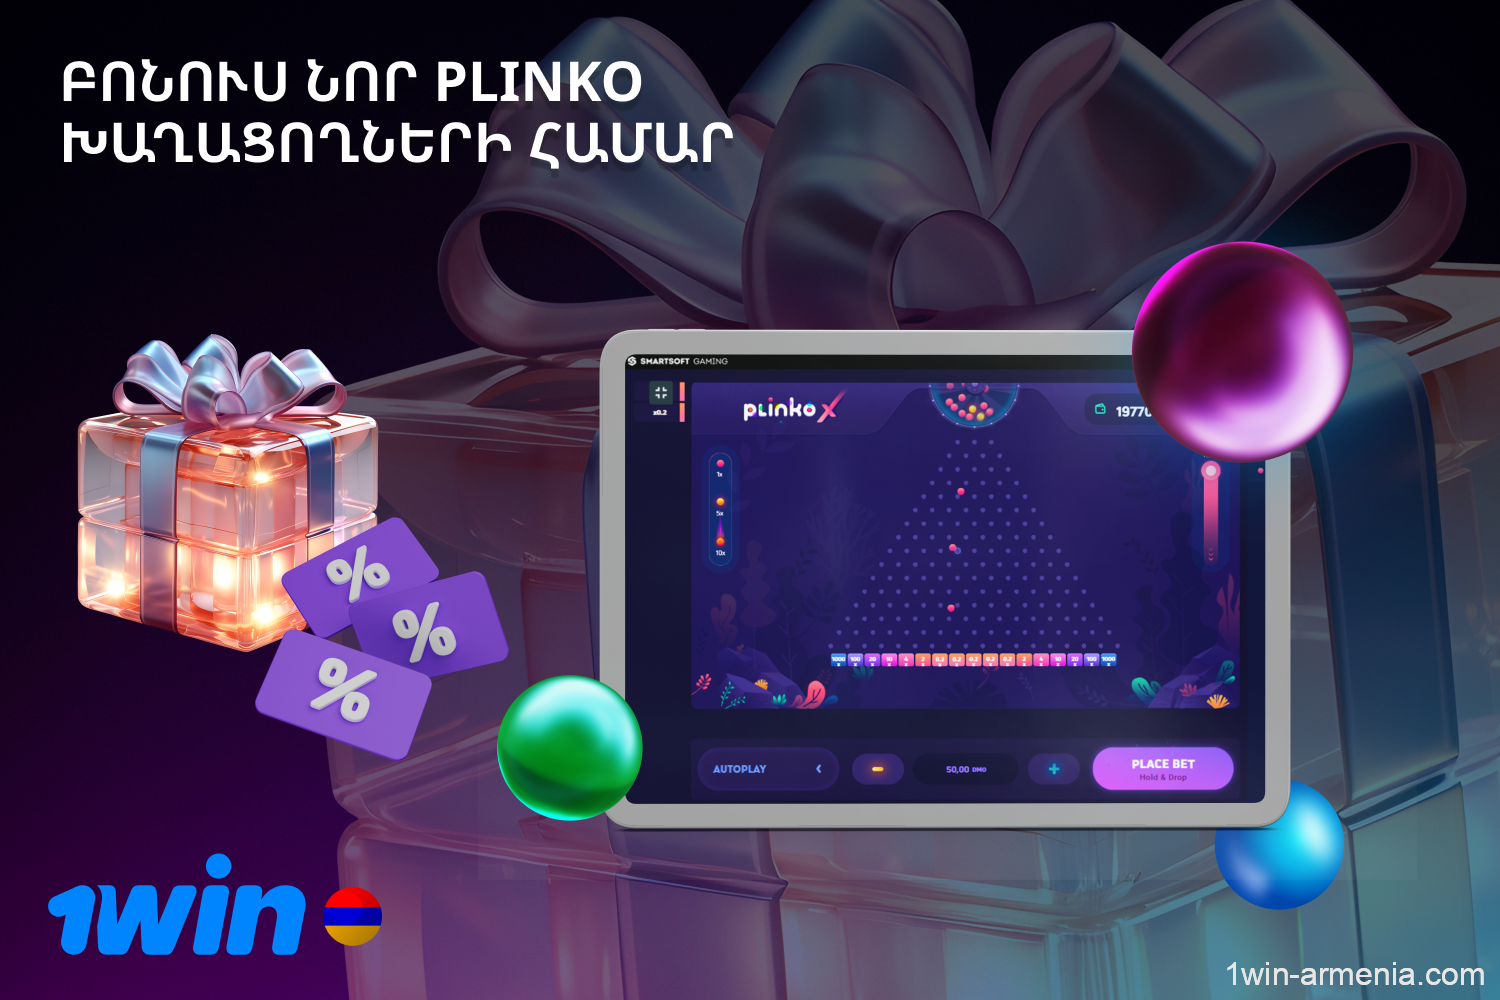 1win offers a special welcome offer especially for new Plinko players from Armenia